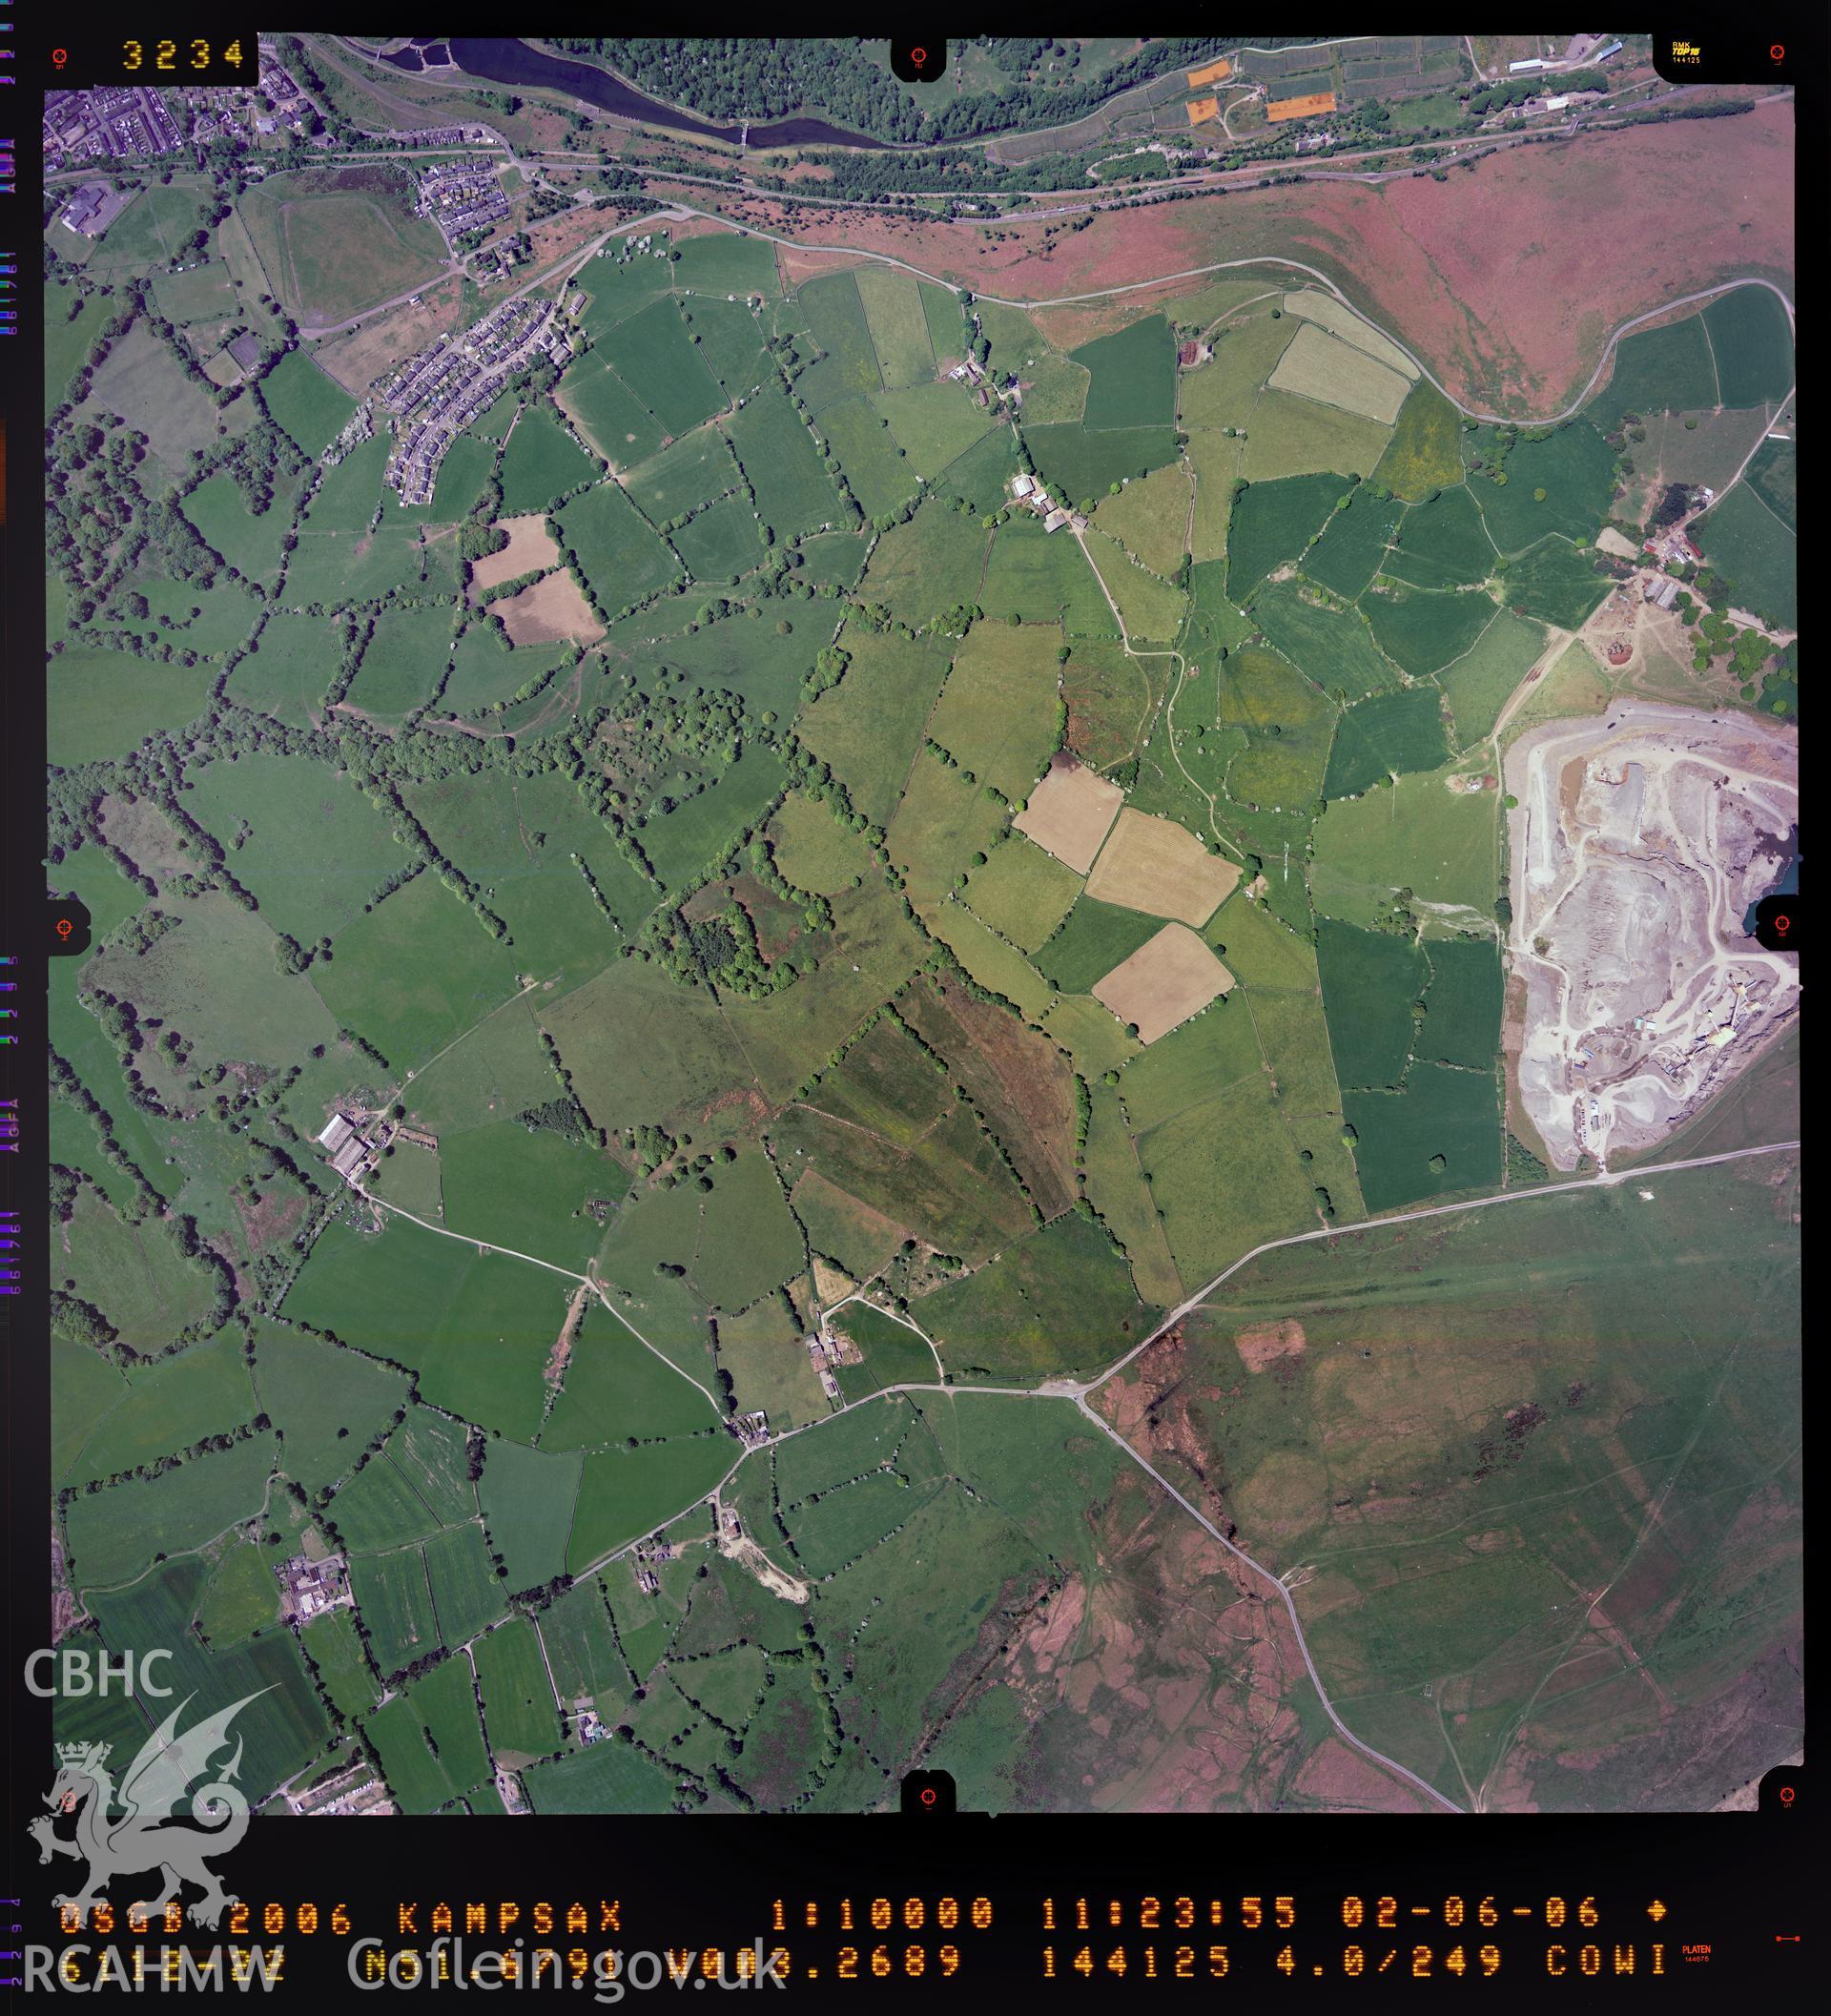 Digitized copy of a colour aerial photograph showing the area around Gelligaer Common, taken by Ordnance Survey, 2006.